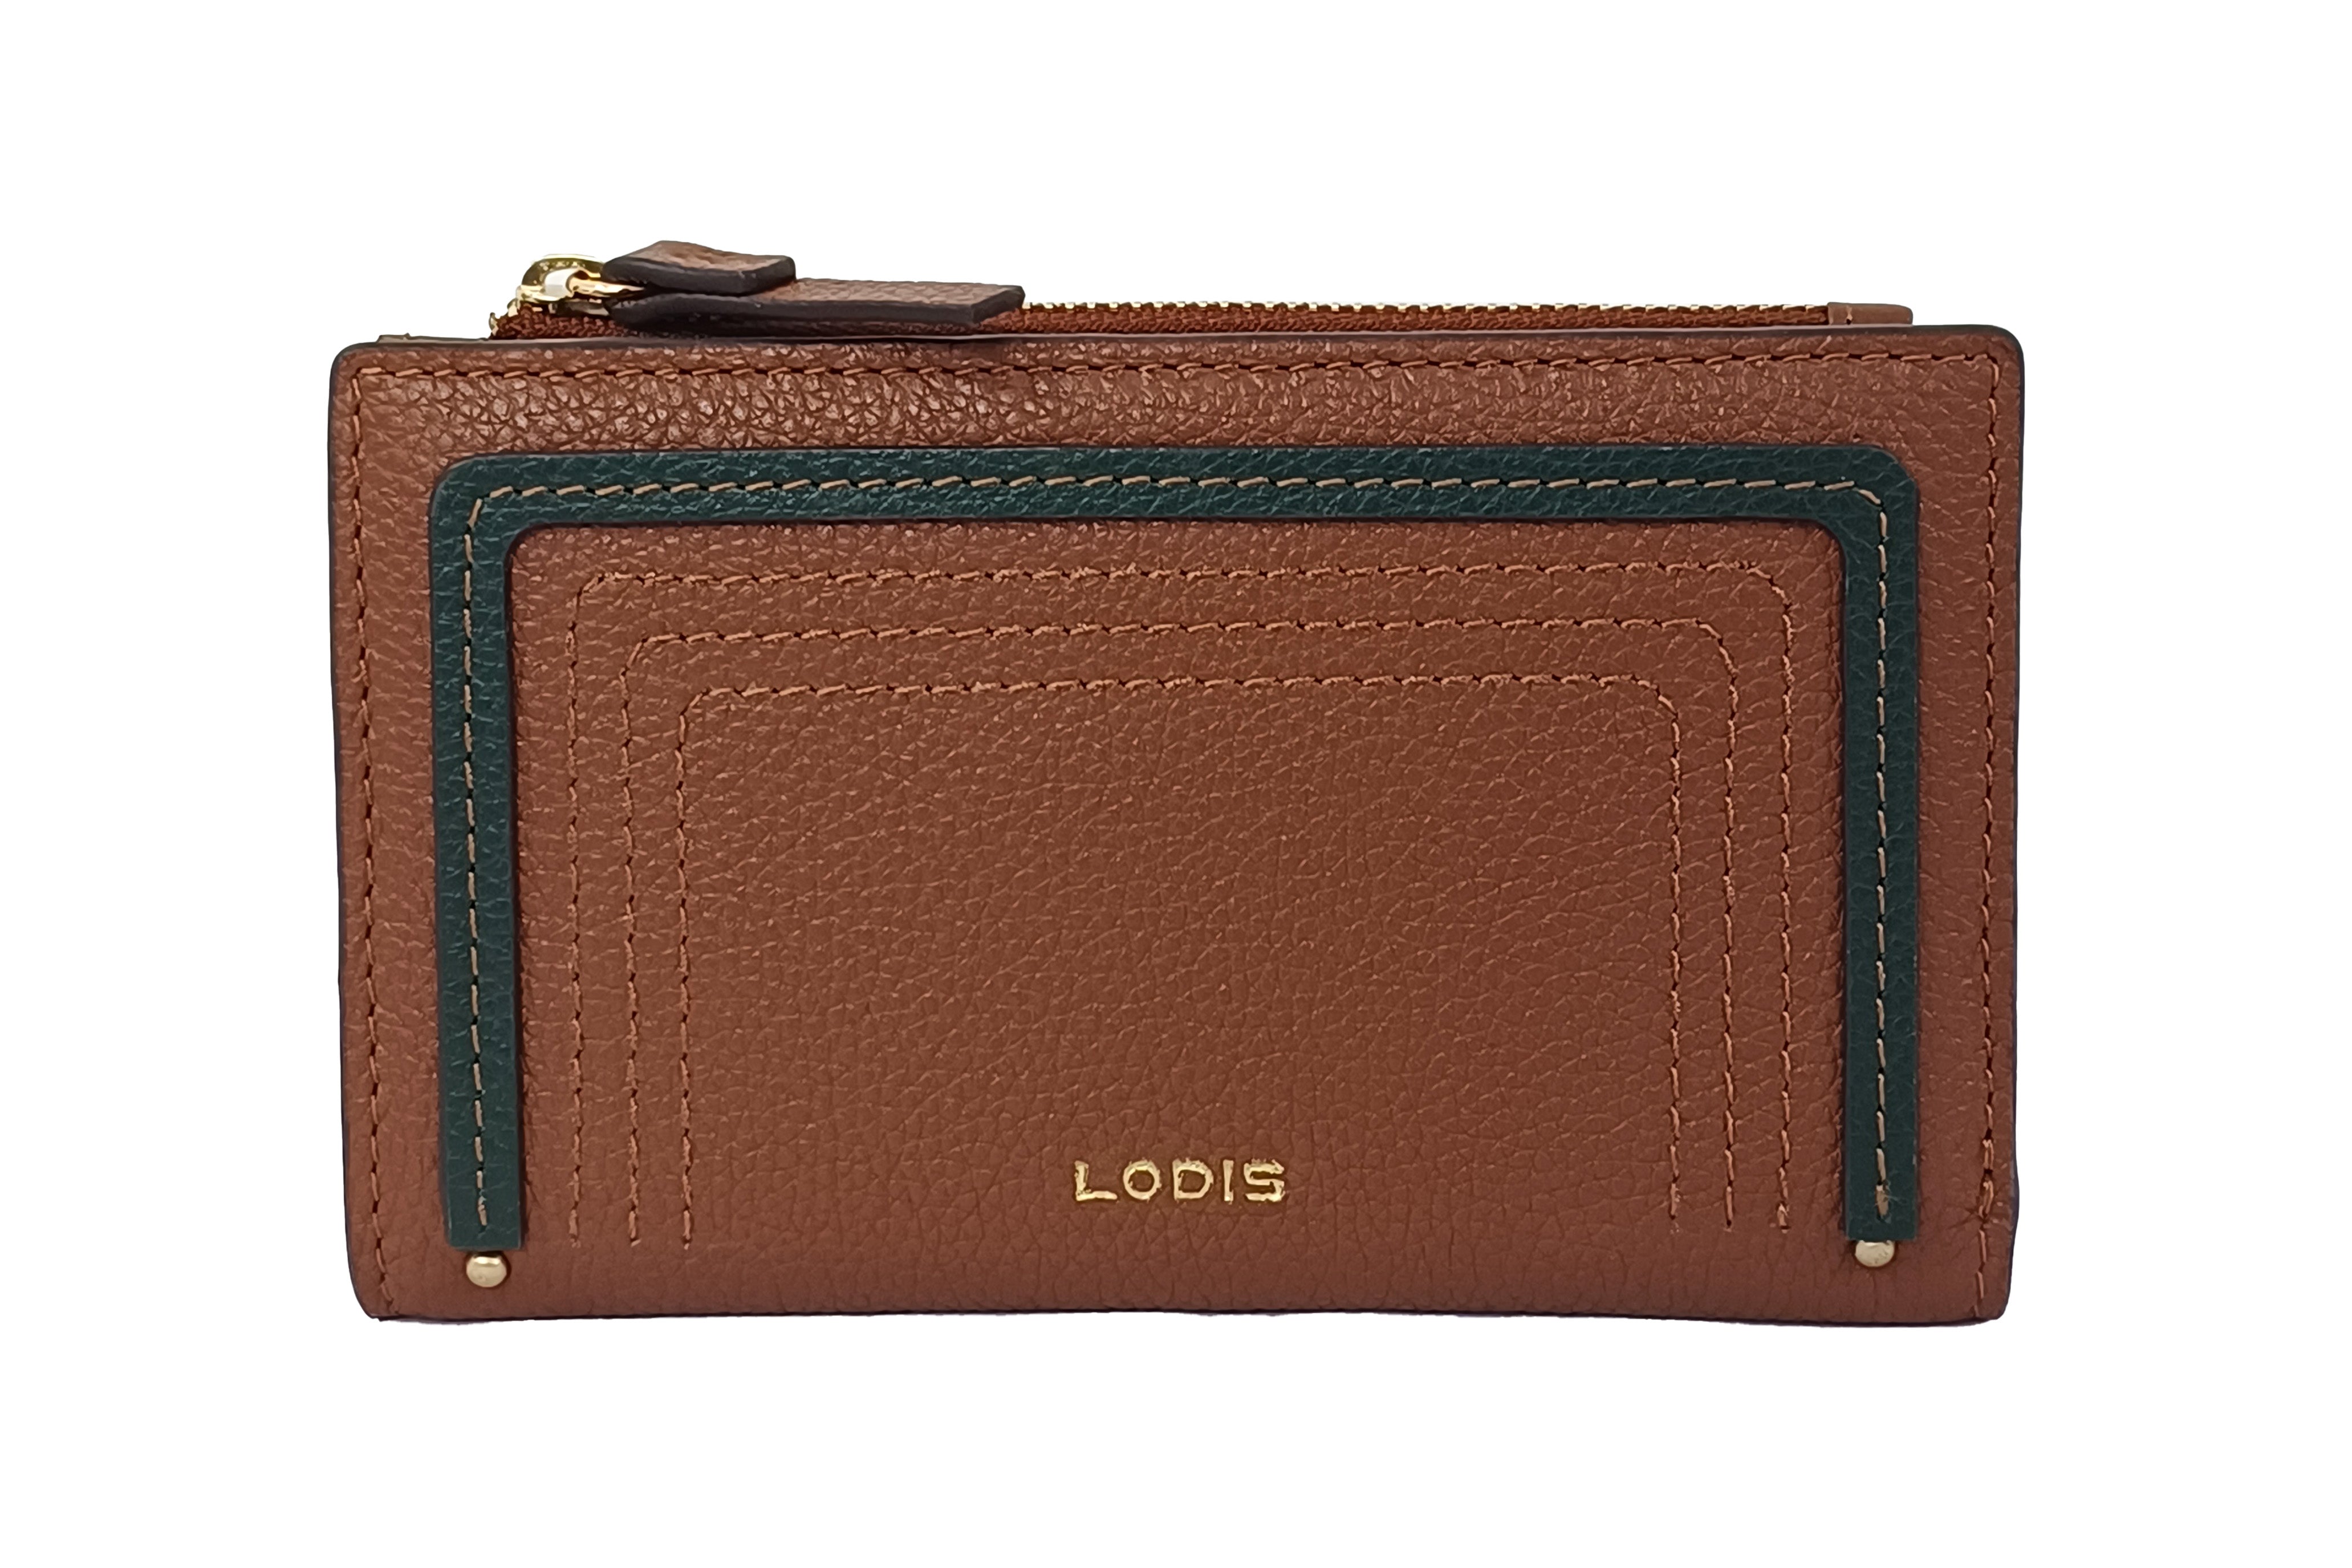 Wallets for women: Leather Purses, clutches & more - Fossil